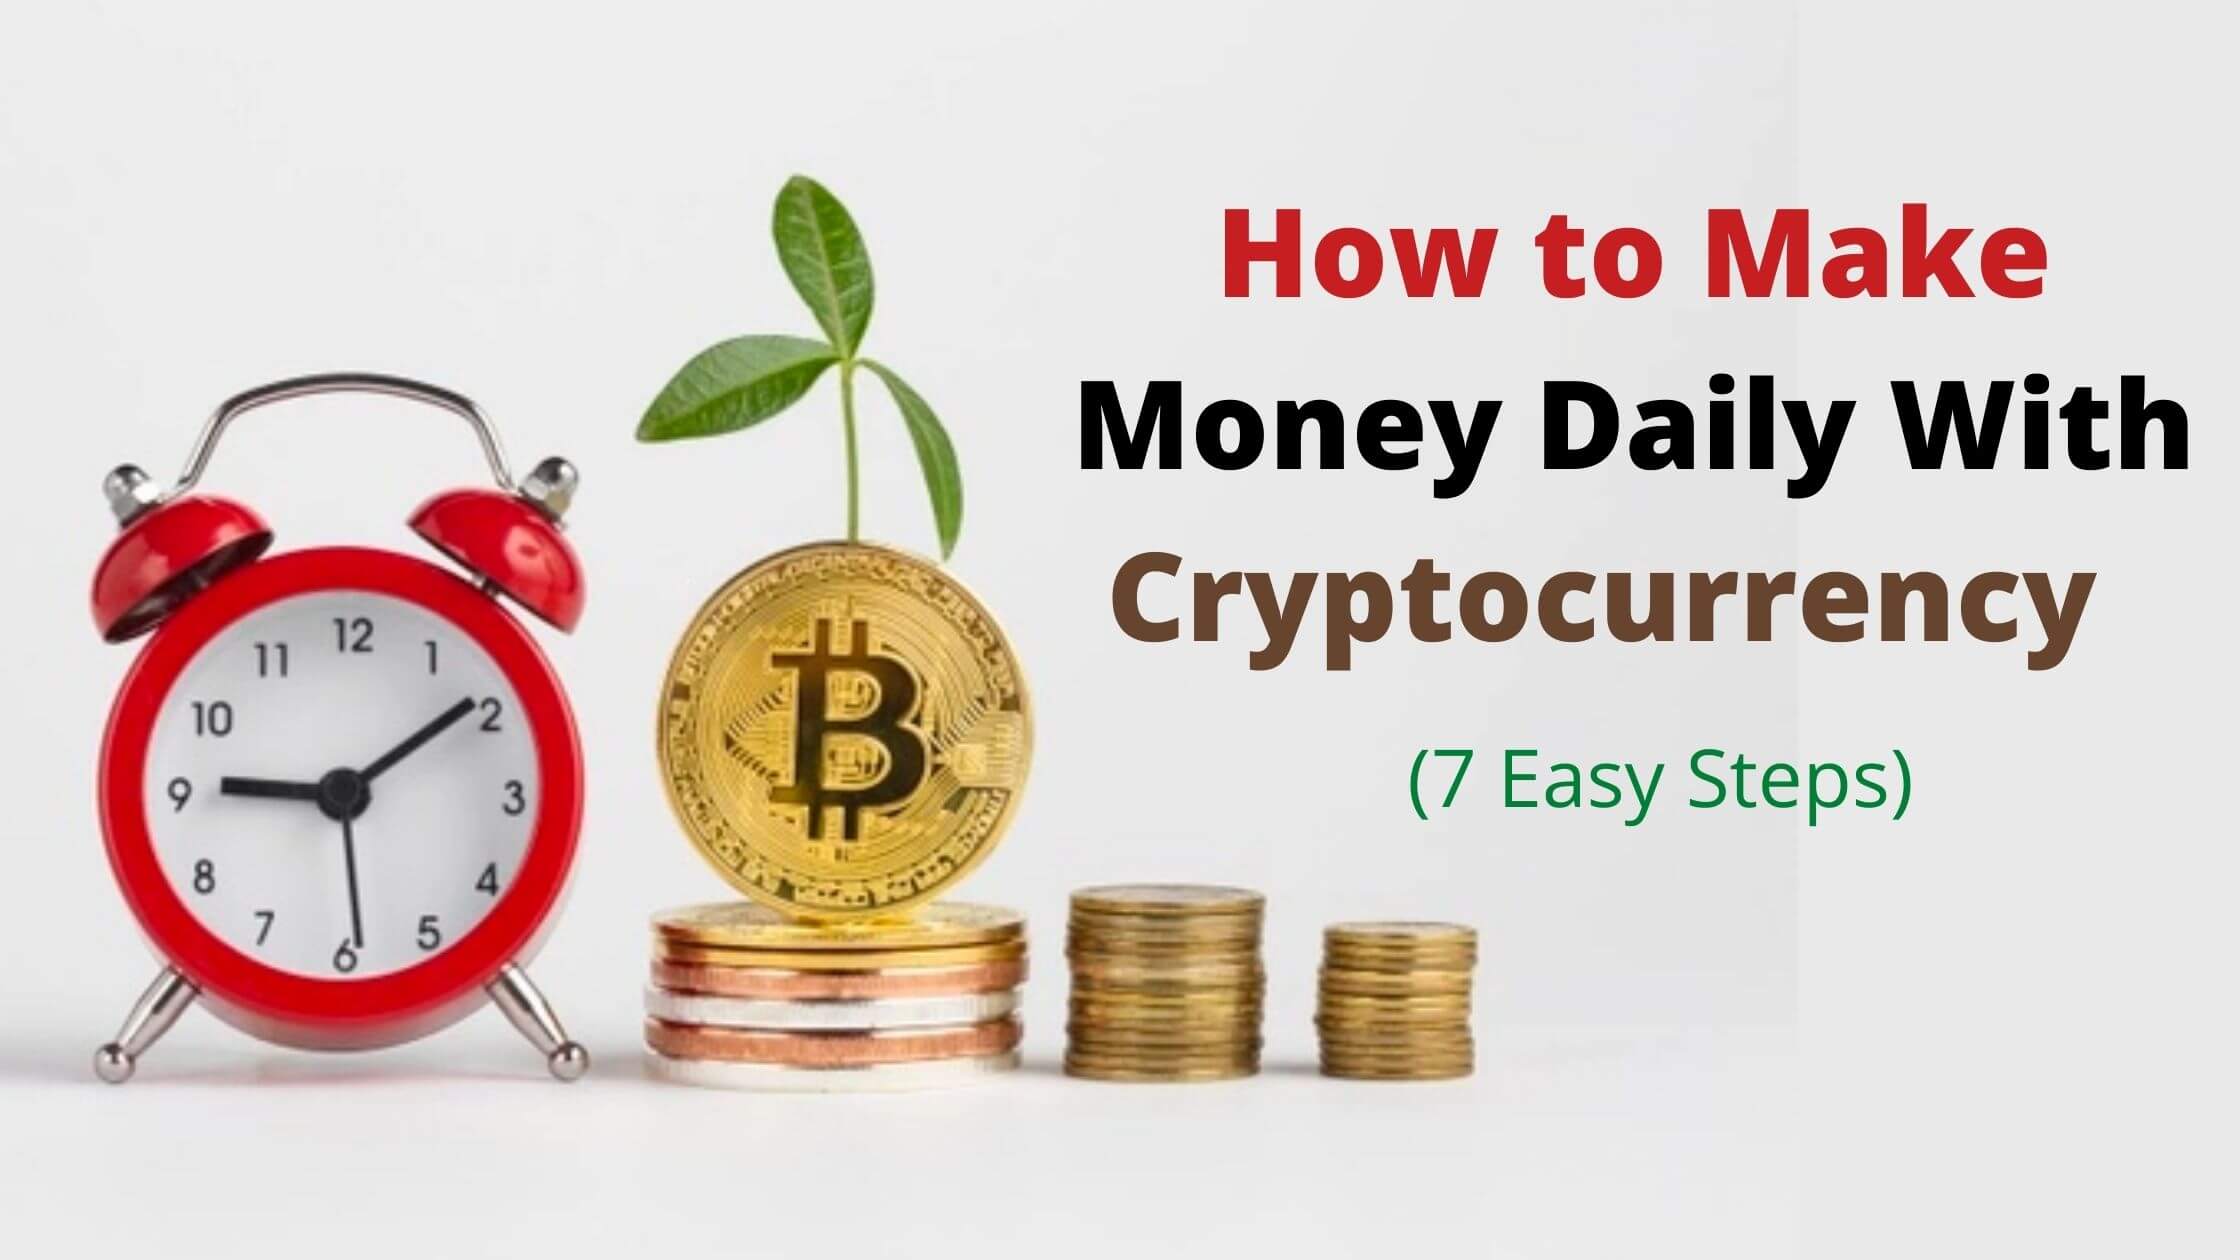 How to Make Money Daily With Cryptocurrency